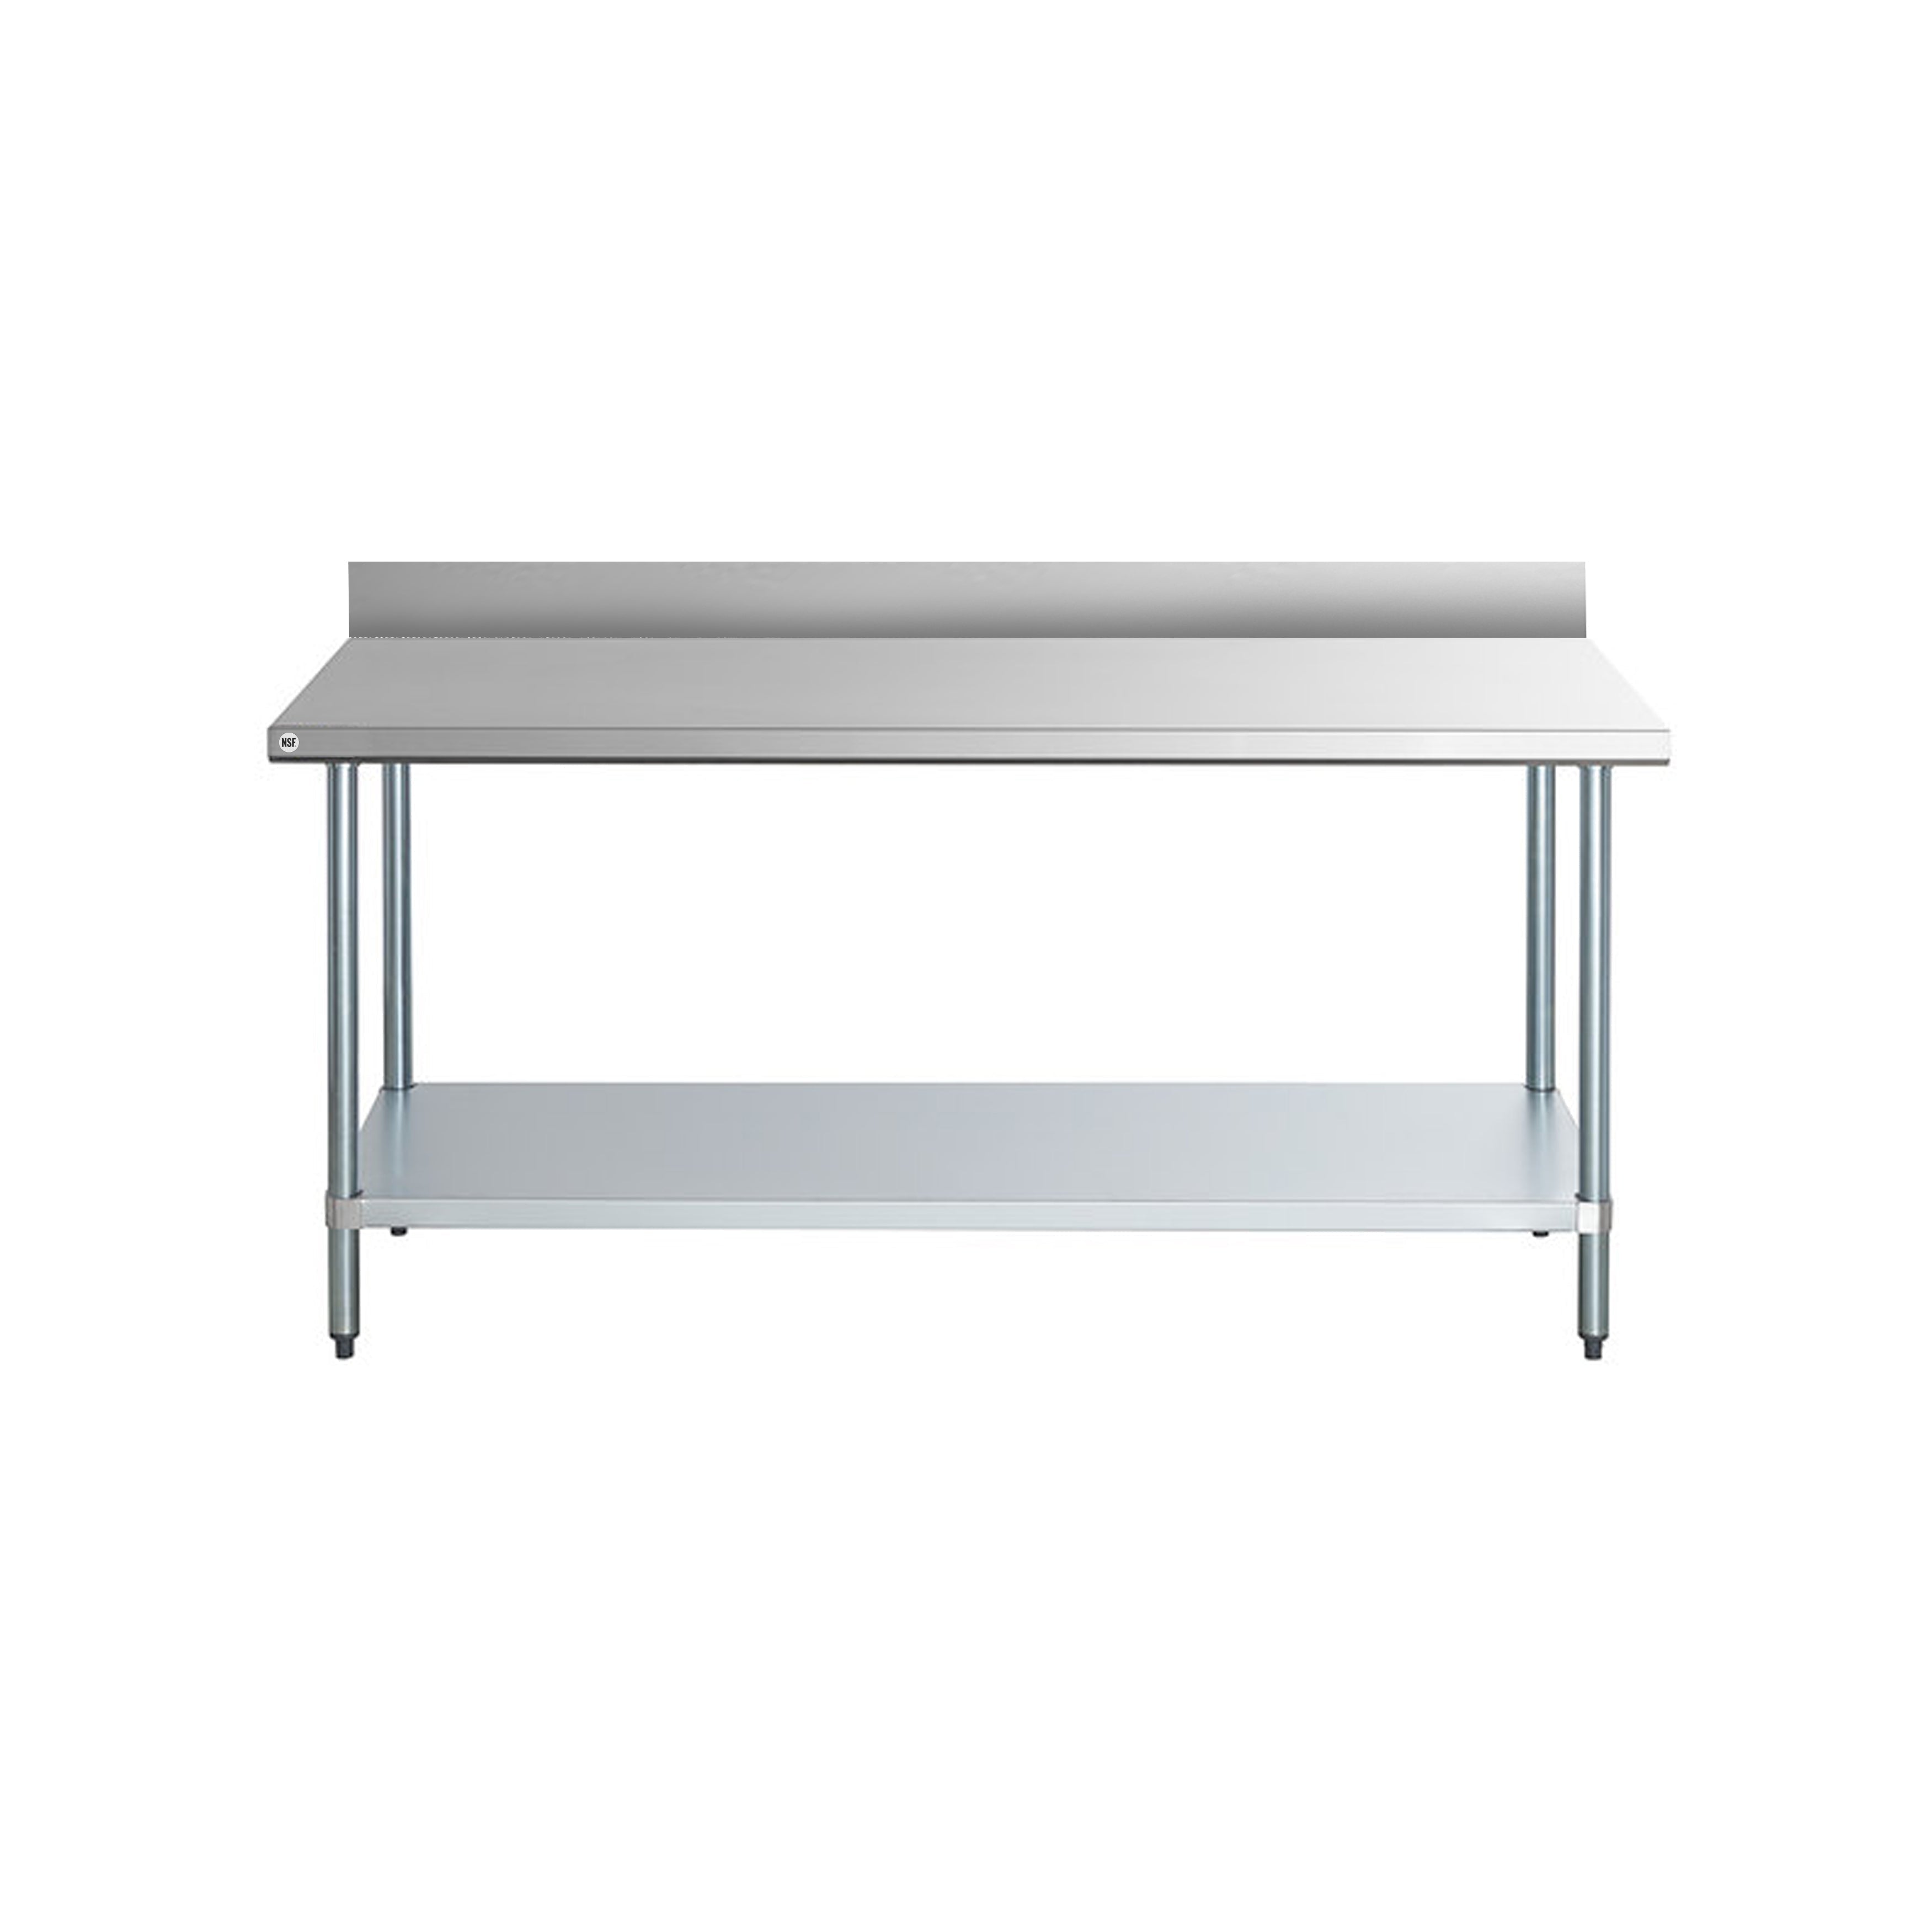 Omcan - 22084, Commercial 24" x 84" Stainless Steel Kitchen Work Table with 4" BackSplash 1500lbs Light Duty